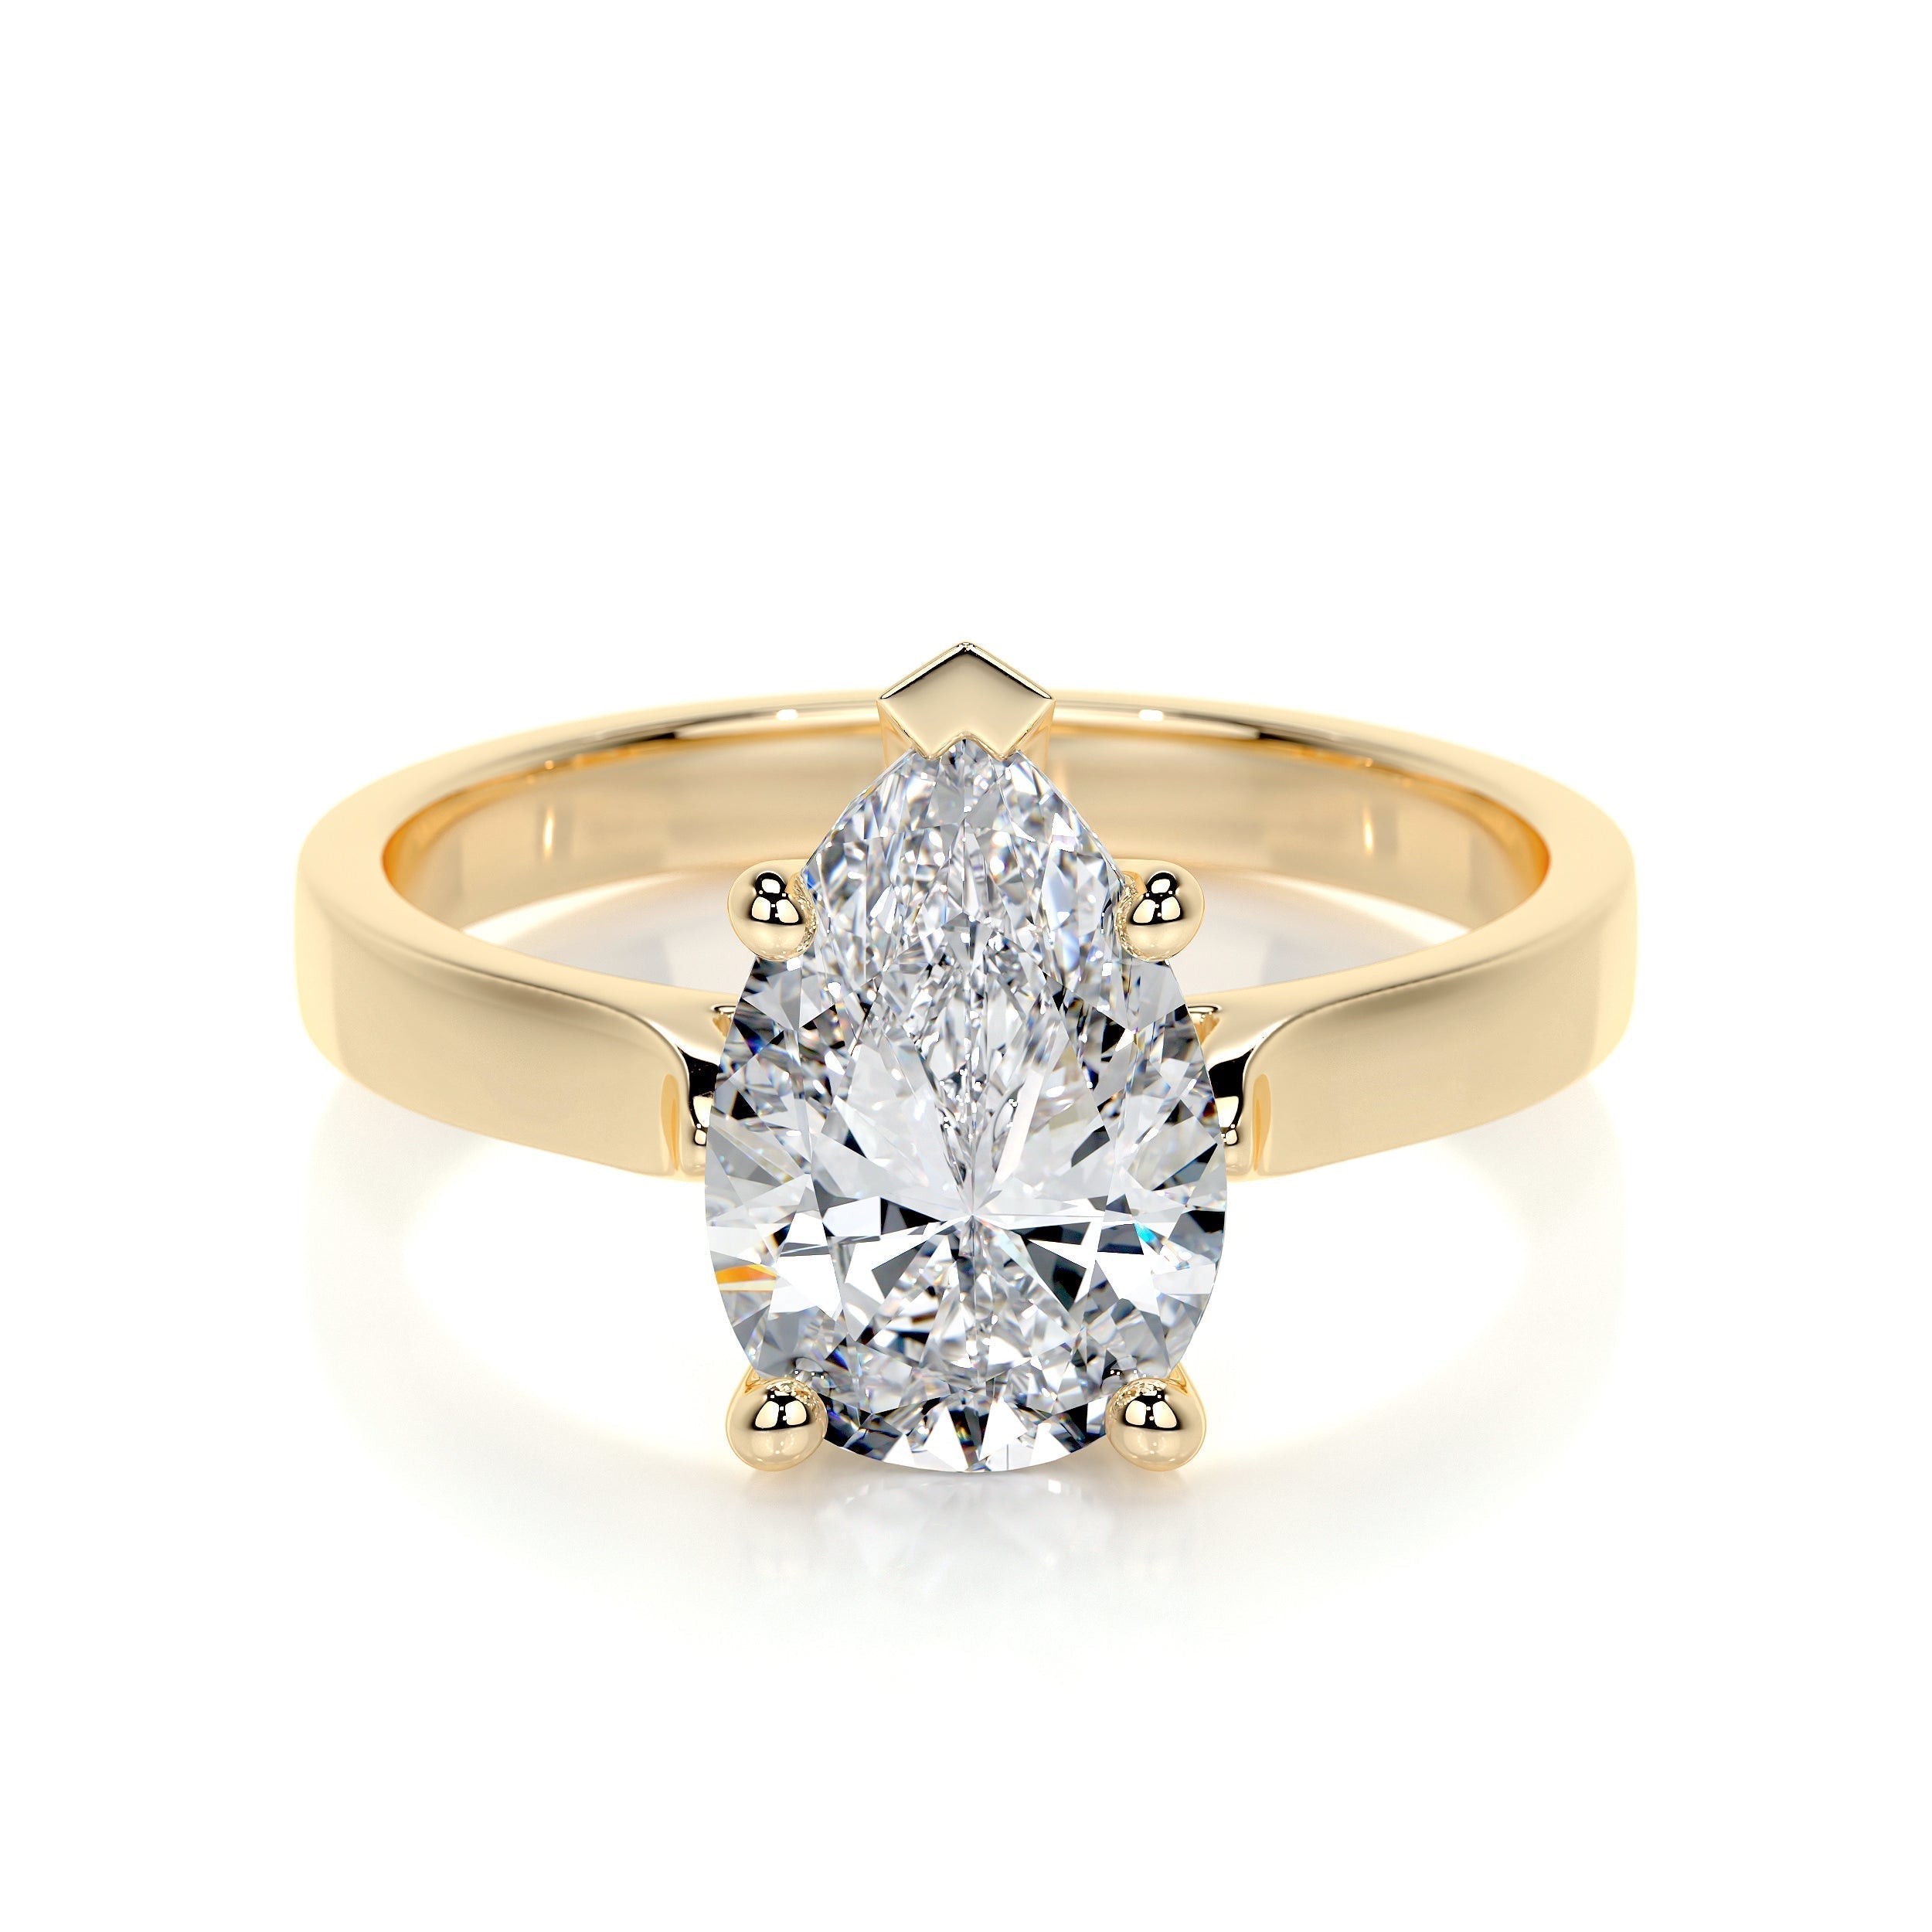 2.0 CT Round Solitaire CVD E/VS2 Diamond Engagement Ring 16